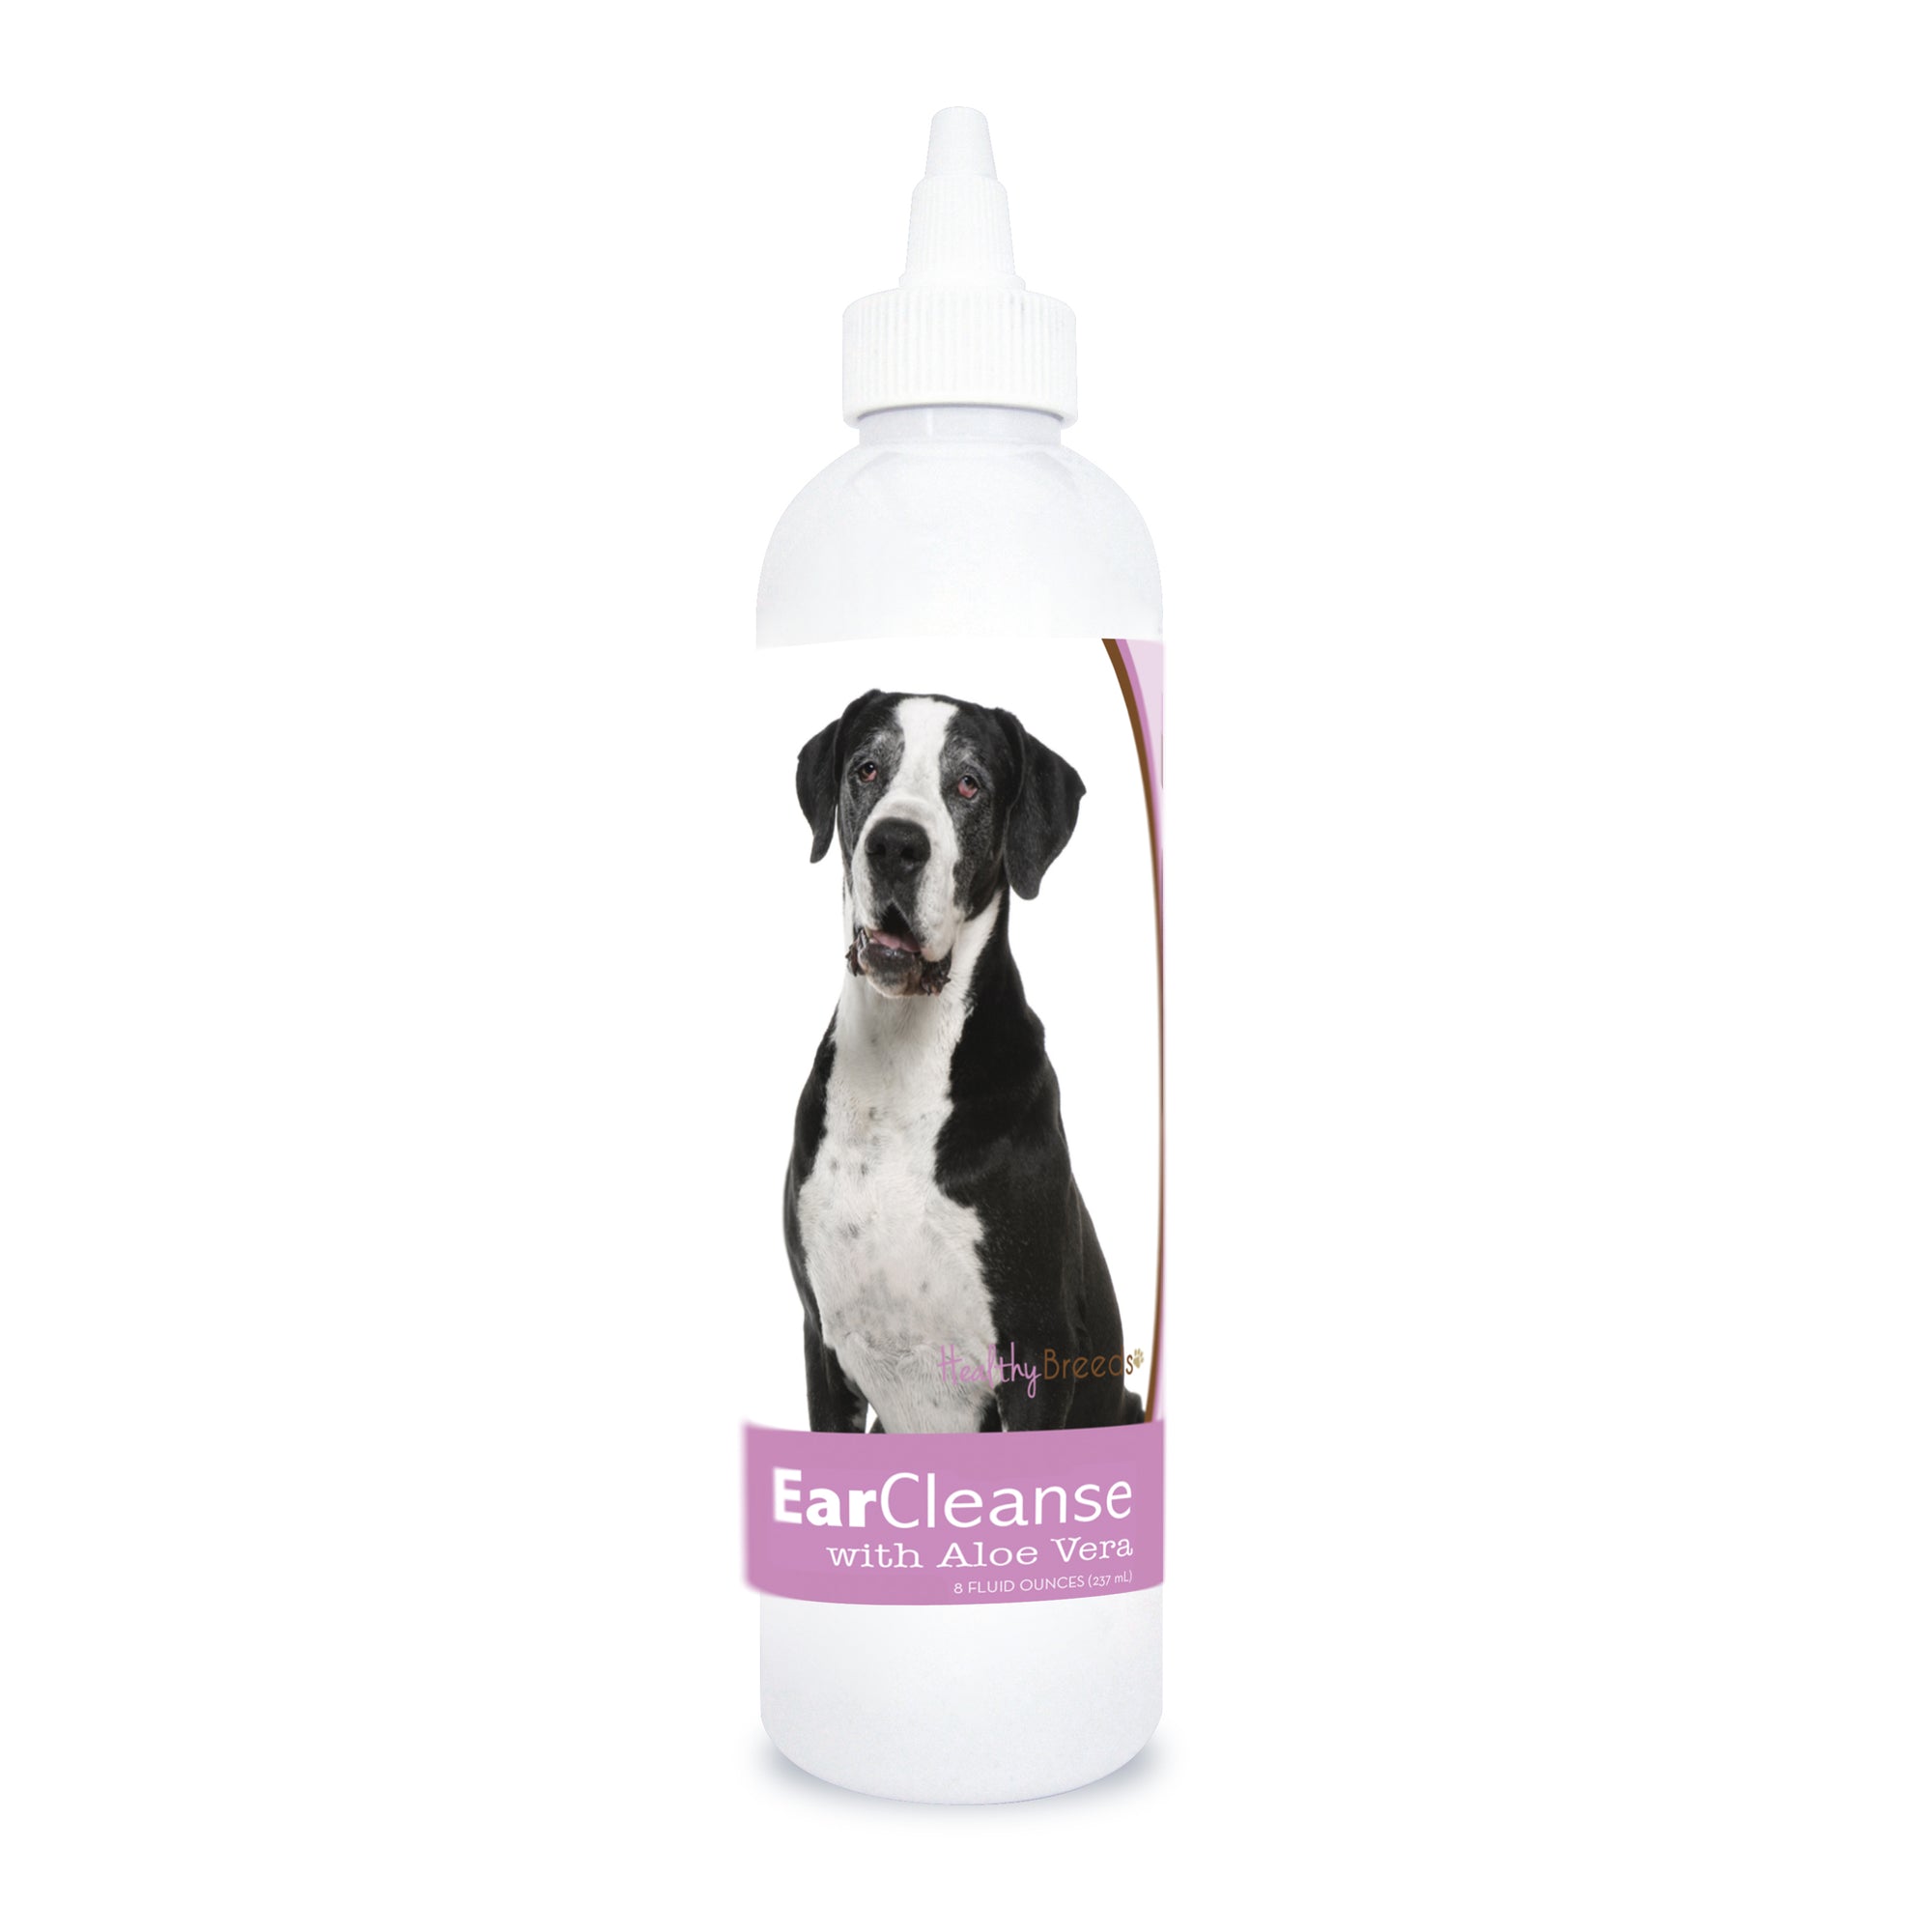 Healthy Breeds Great Dane Ear Cleanse with Aloe Vera Sweet Pea and Vanilla 8 oz